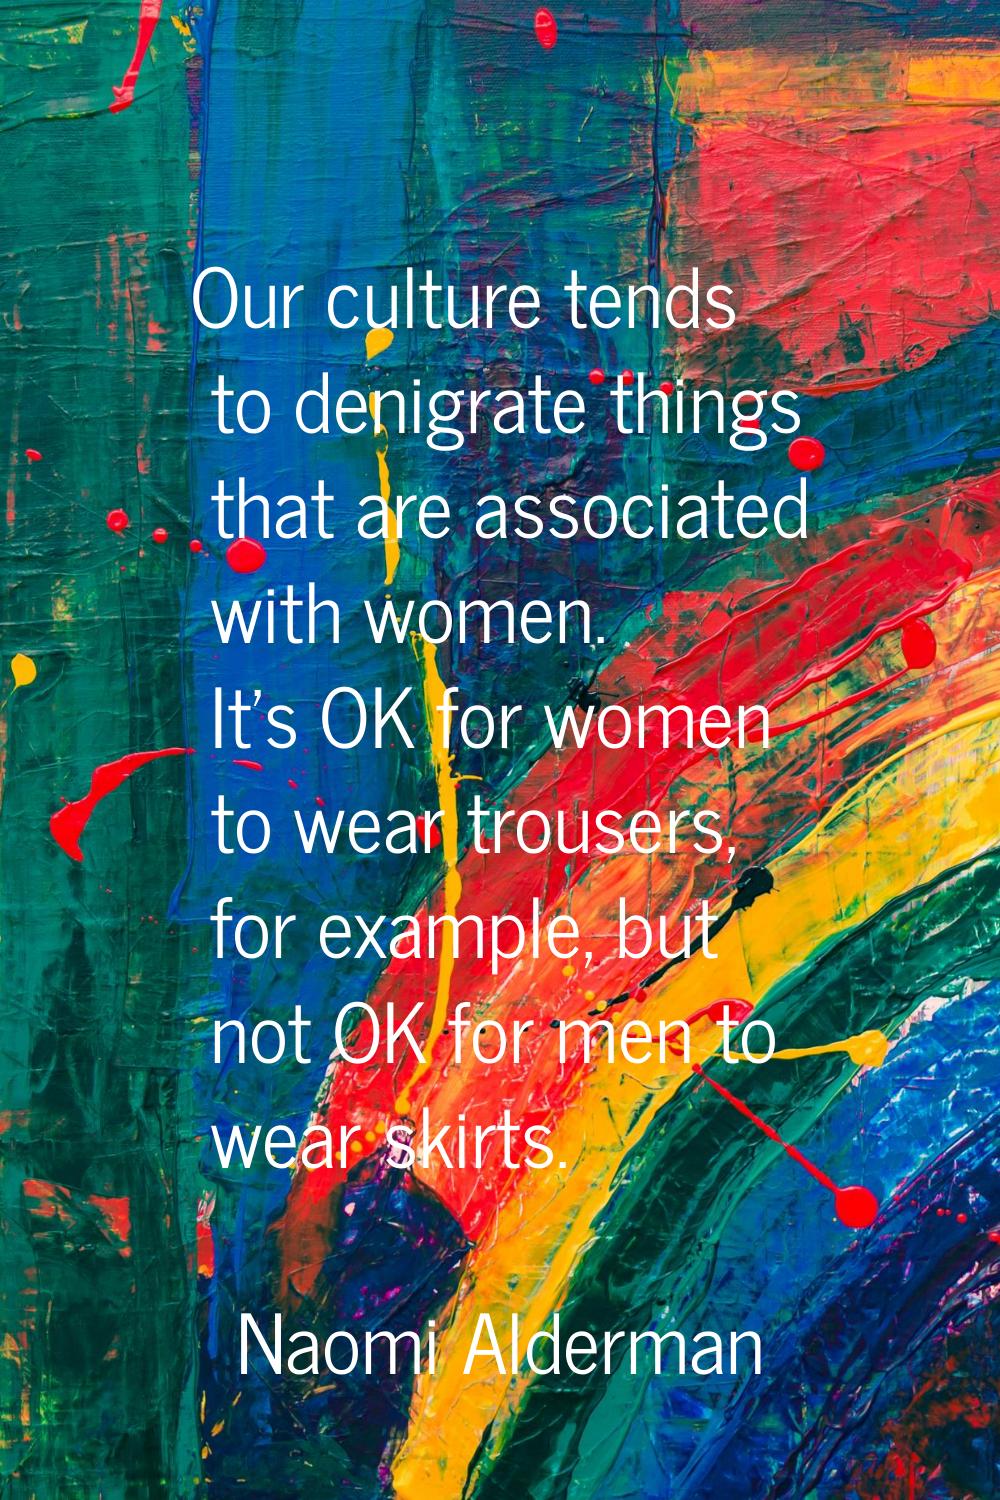 Our culture tends to denigrate things that are associated with women. It's OK for women to wear tro